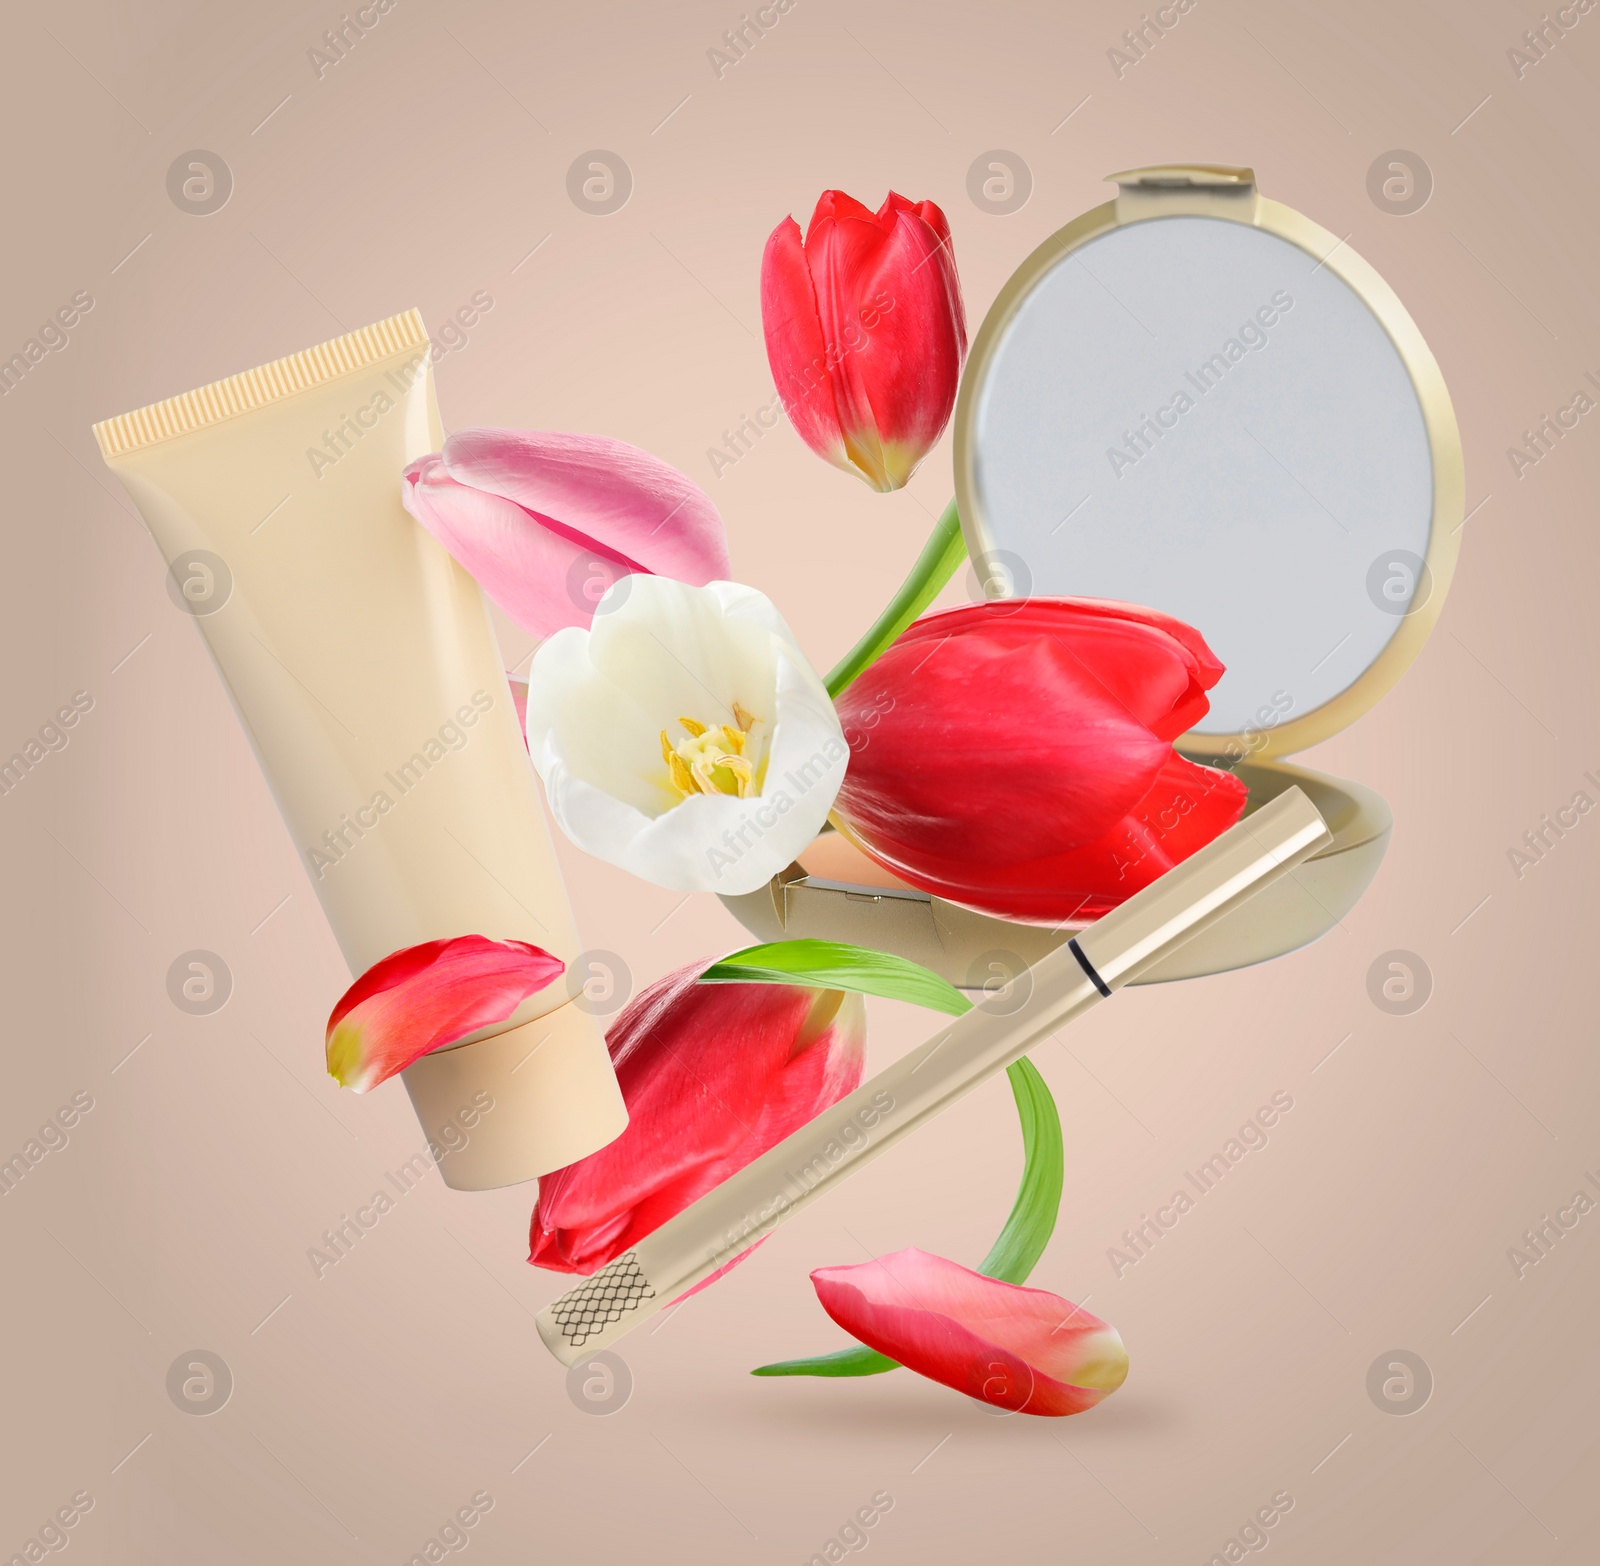 Image of Spring flowers and makeup products in air on dark beige background